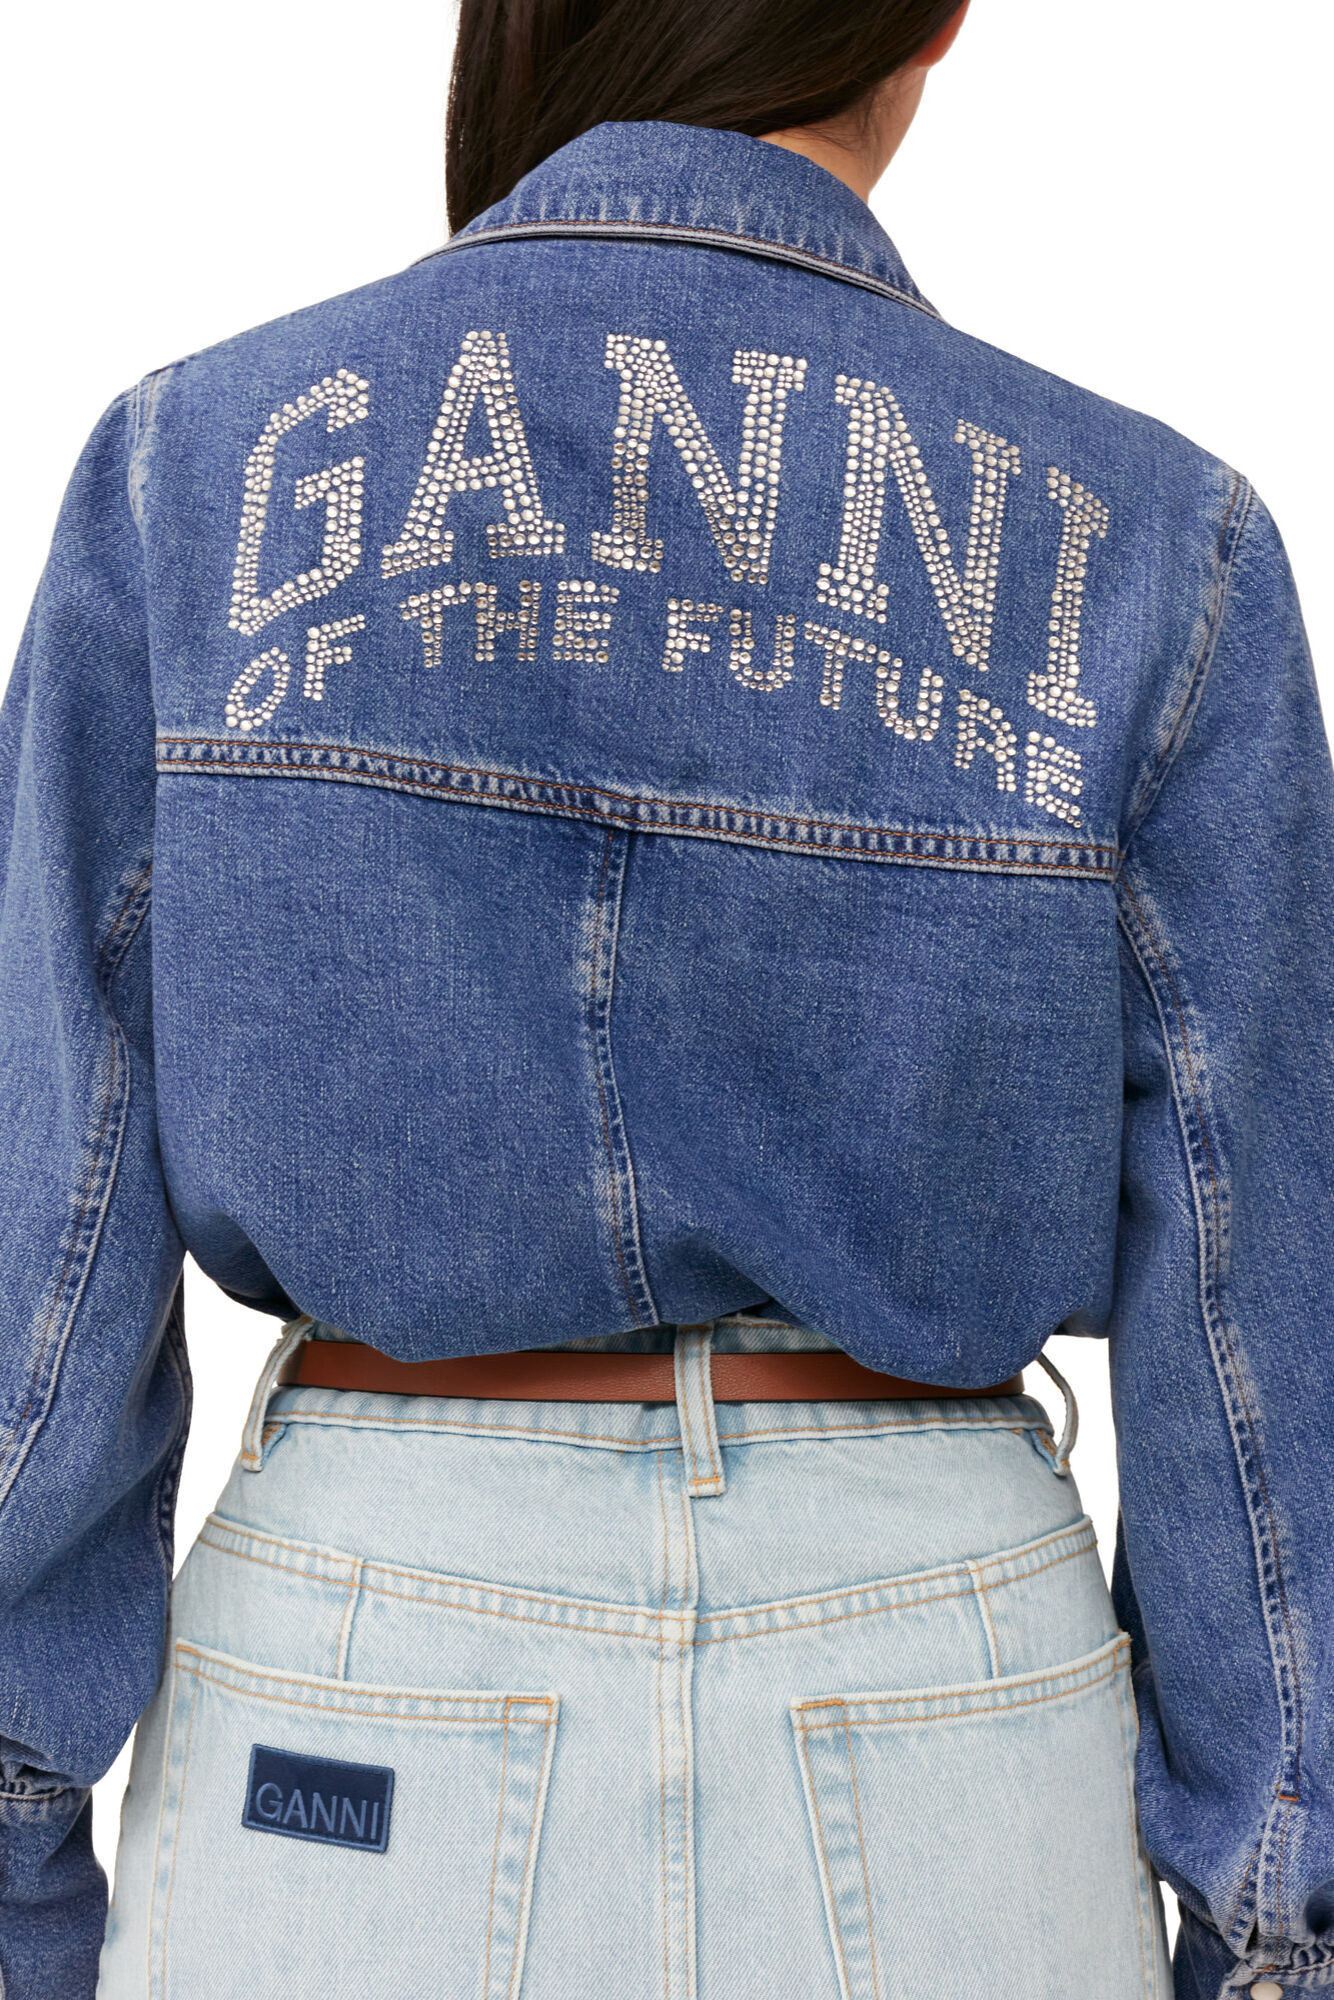 The Future of the Jeans Industry Innovation in Denim Fashion